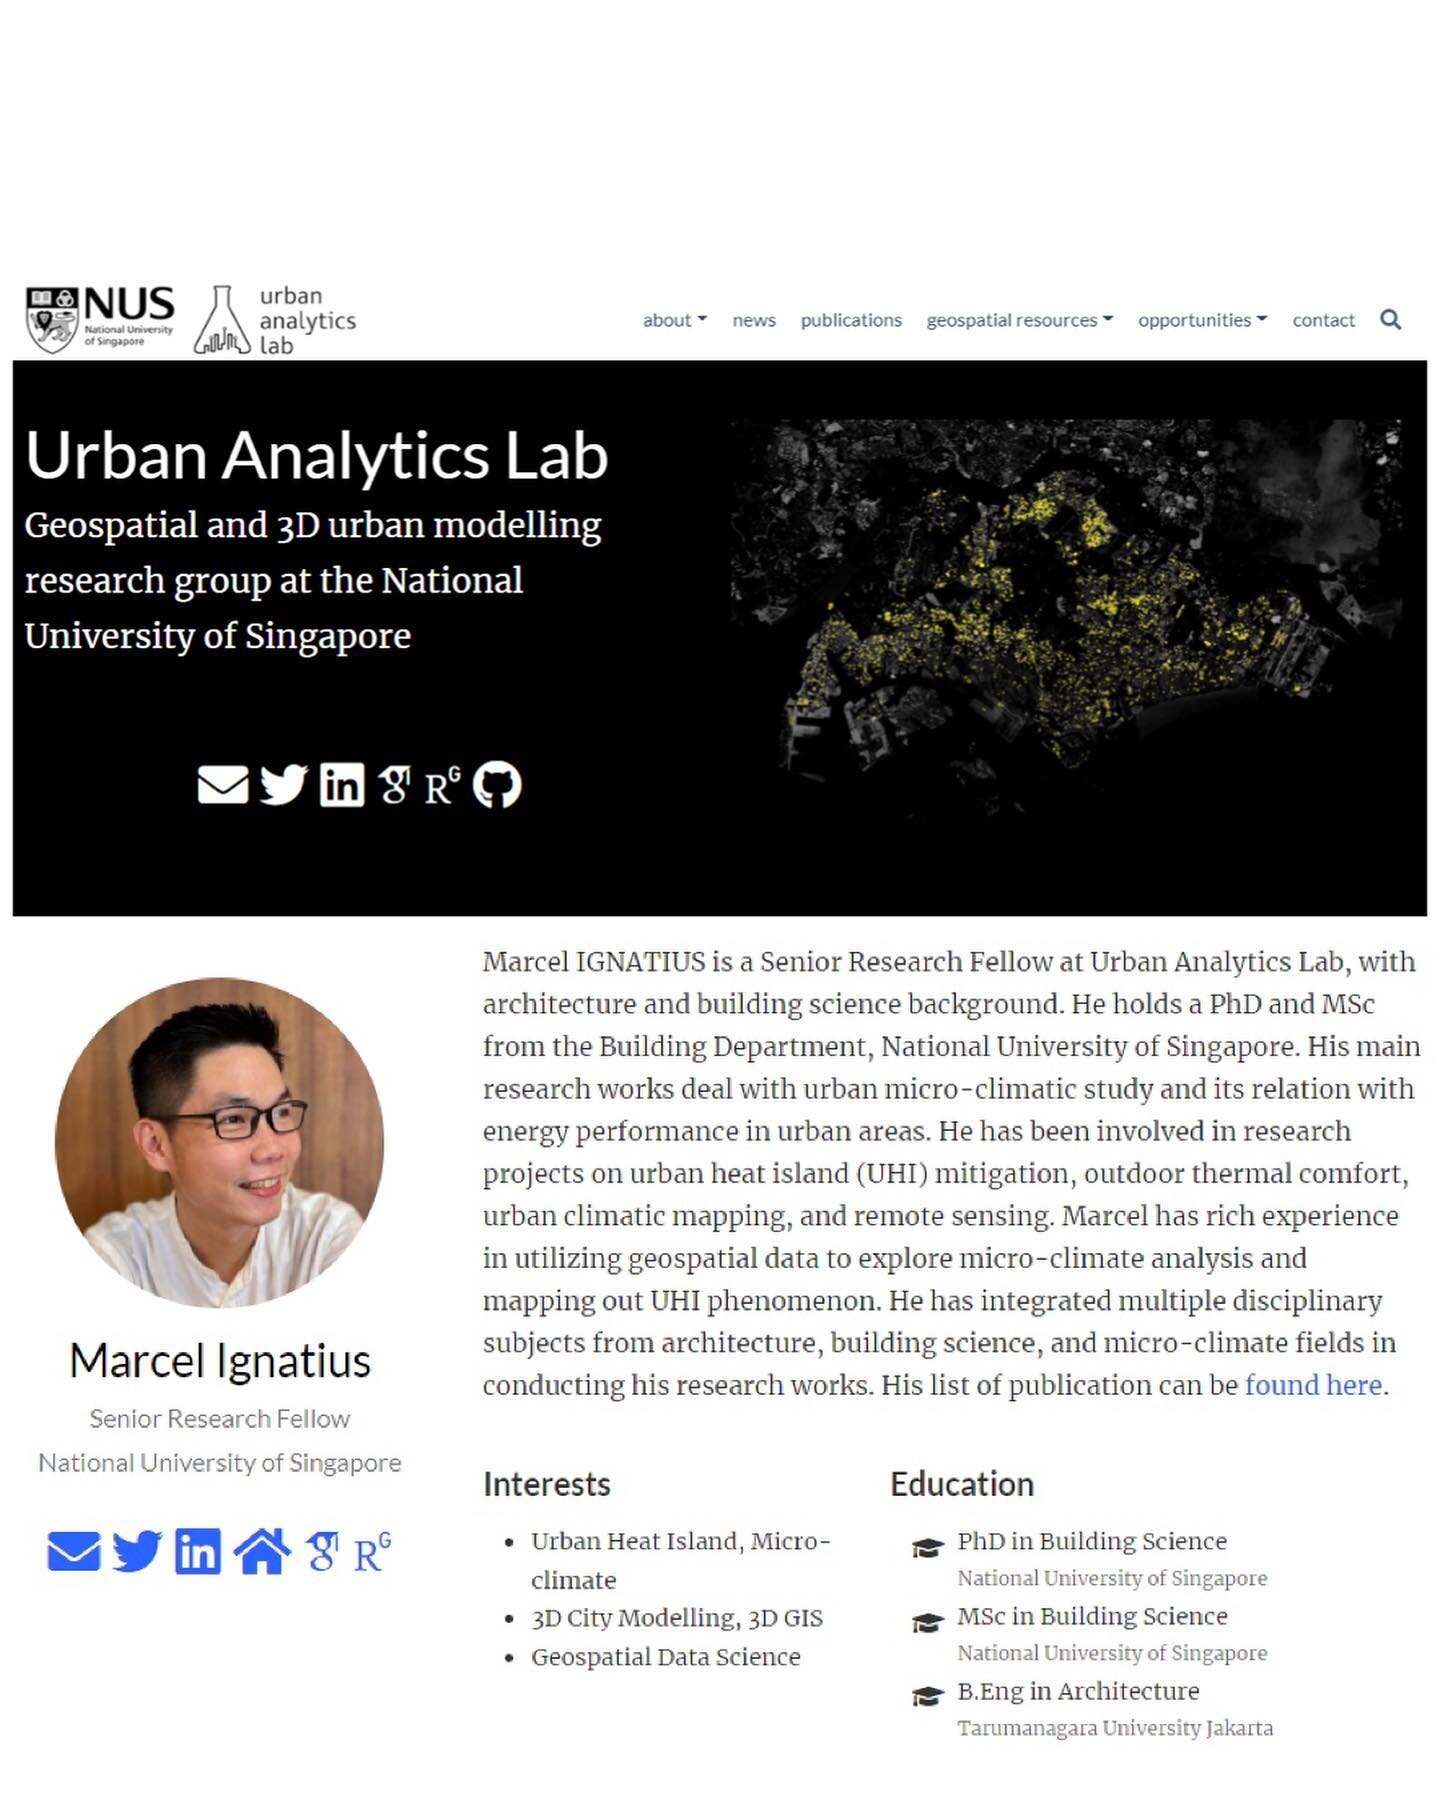 I'm excited to announce that I have joined Urban Analytics Lab (UAL) family as their newest Senior Research Fellow. After many years working with Prof. Wong Nyuk Hien and his amazing research team, I've decided that it's a perfect time to move on int